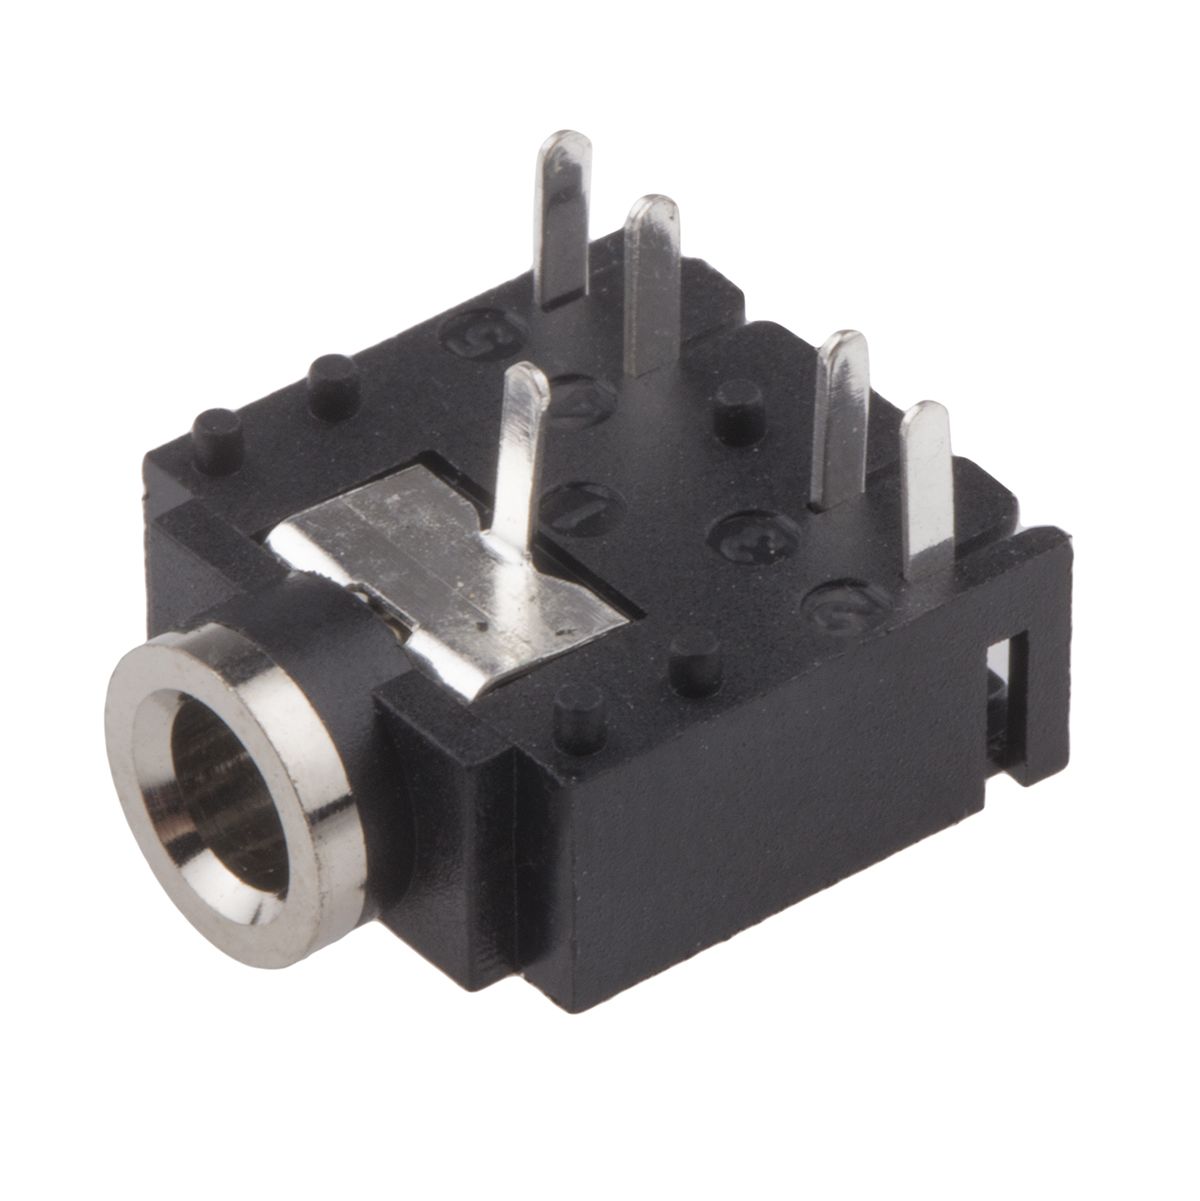 RS PRO Jack Connector 3.5 mm PCB Mount Stereo Socket, 5Pole